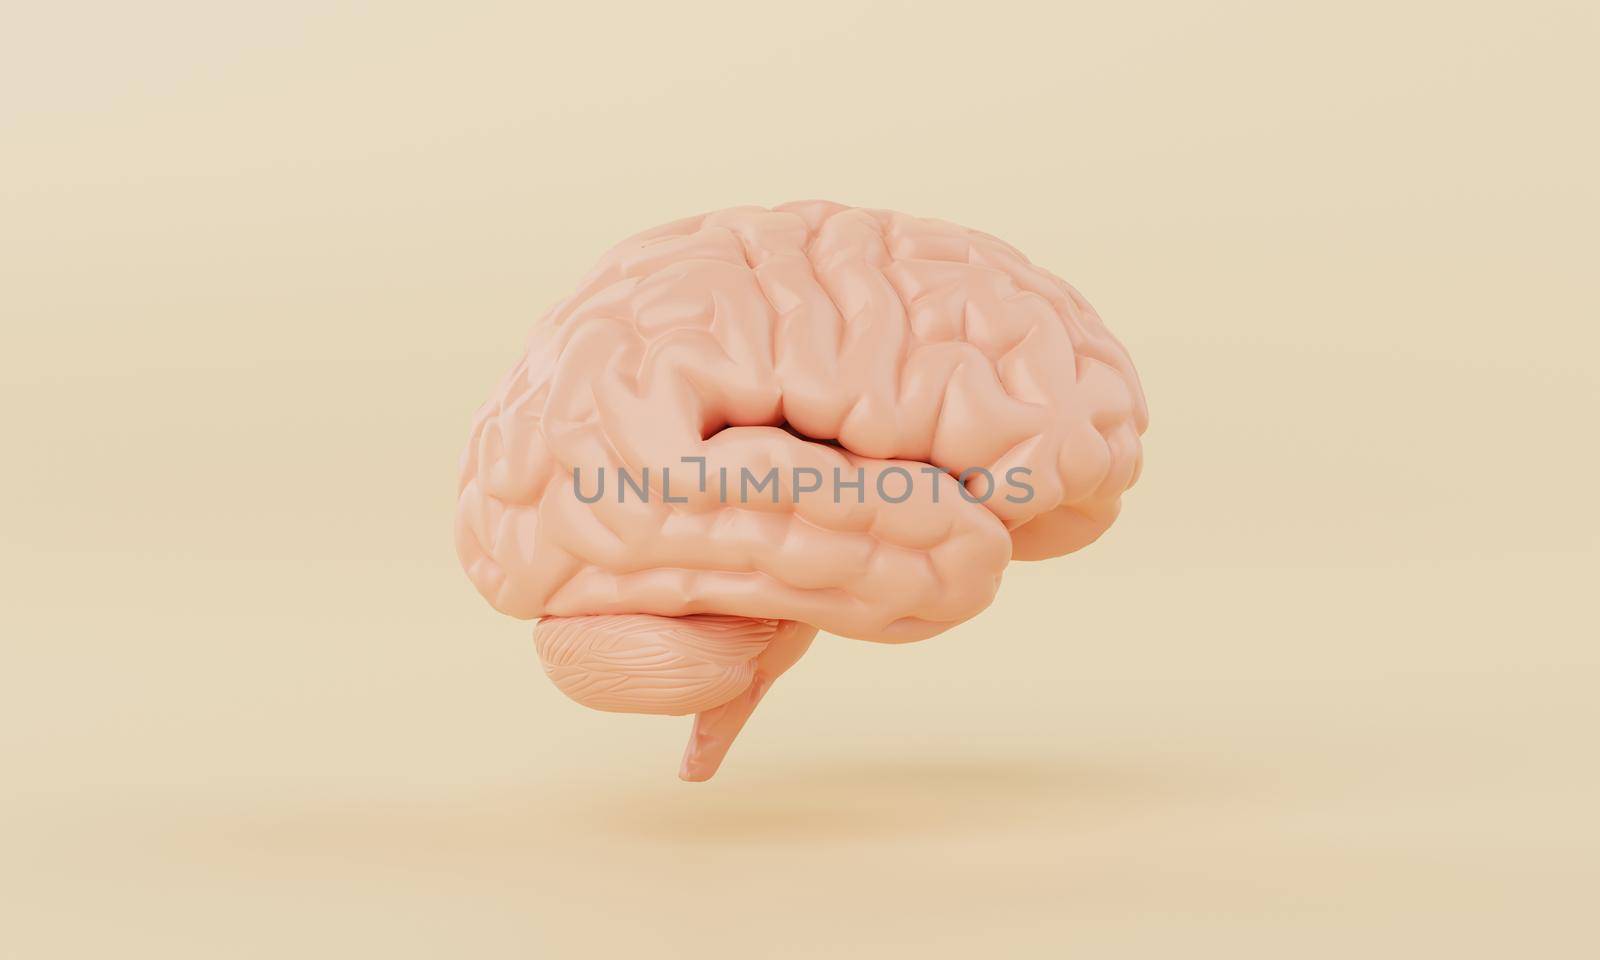 Orange simple mind brain model on yellow background. Medical science healthcare and abstract object concept. 3D illustration rendering